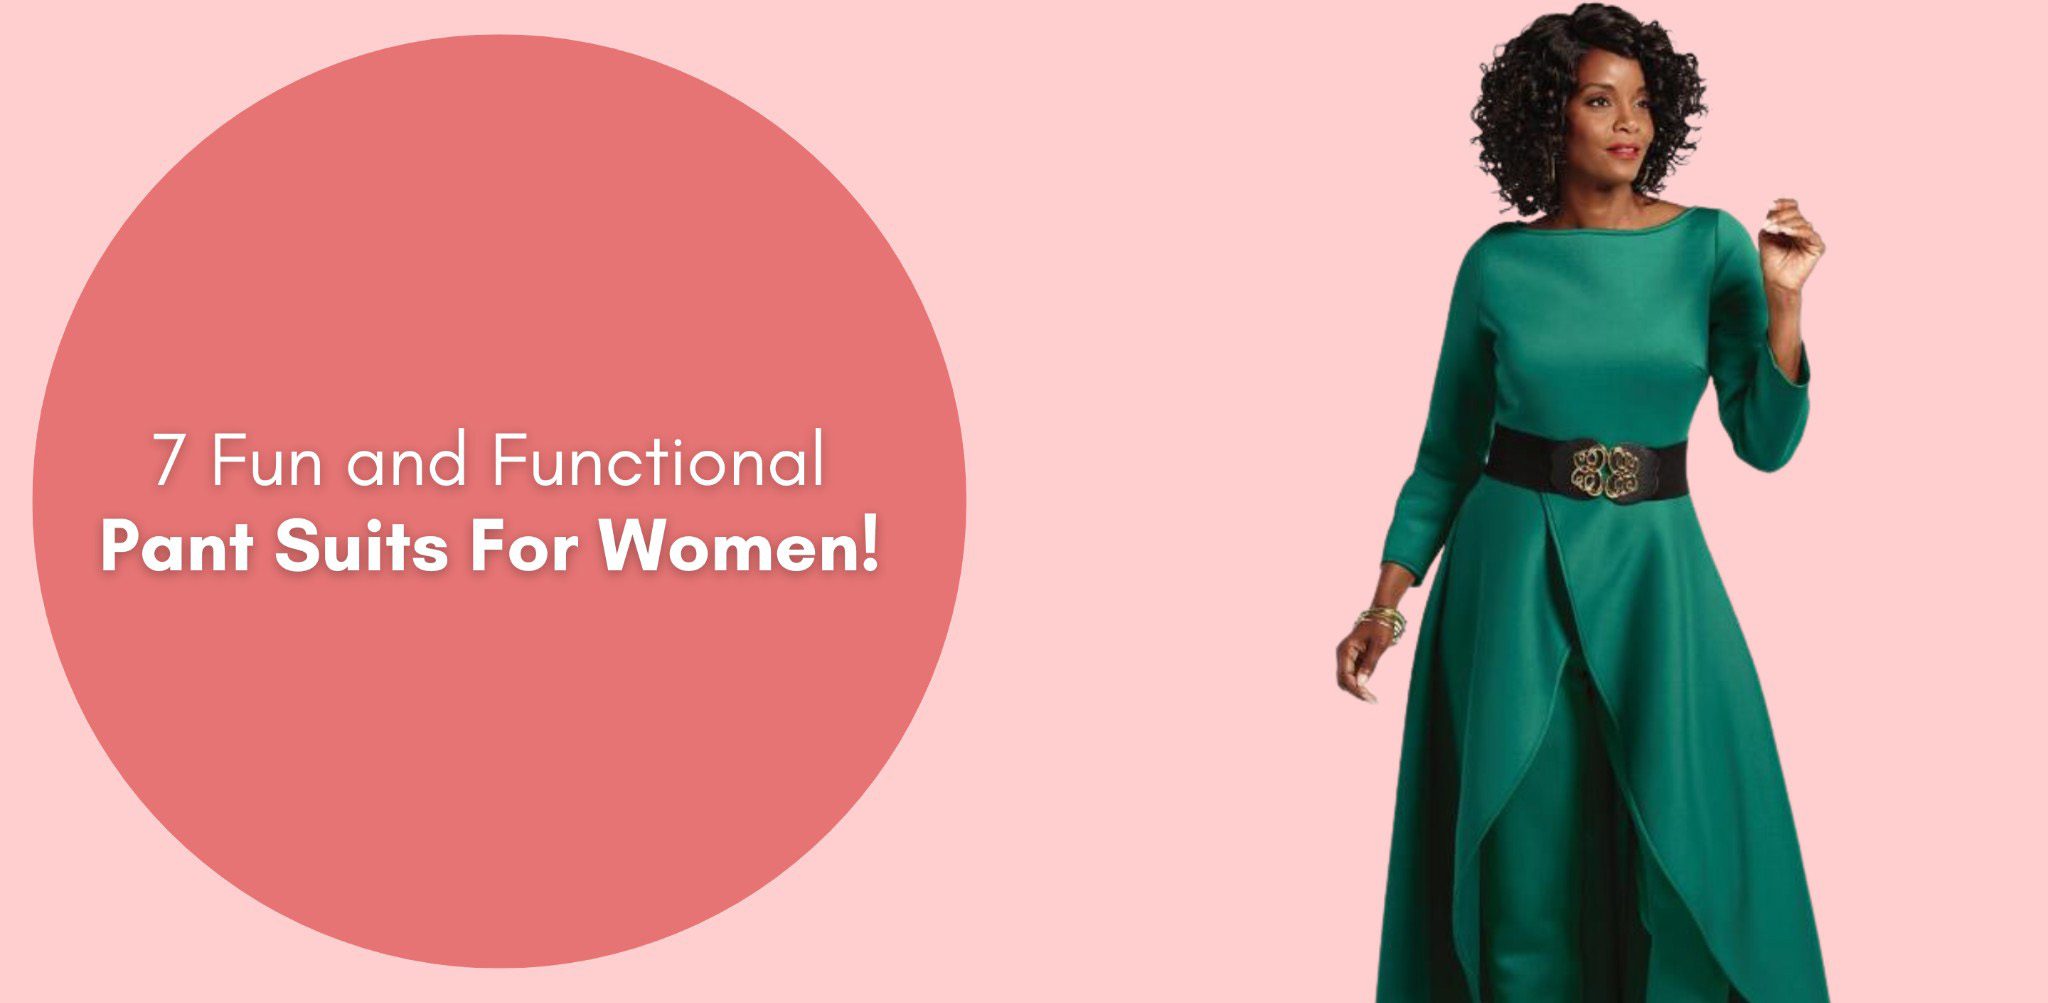 7 fun and functional pant suits for women